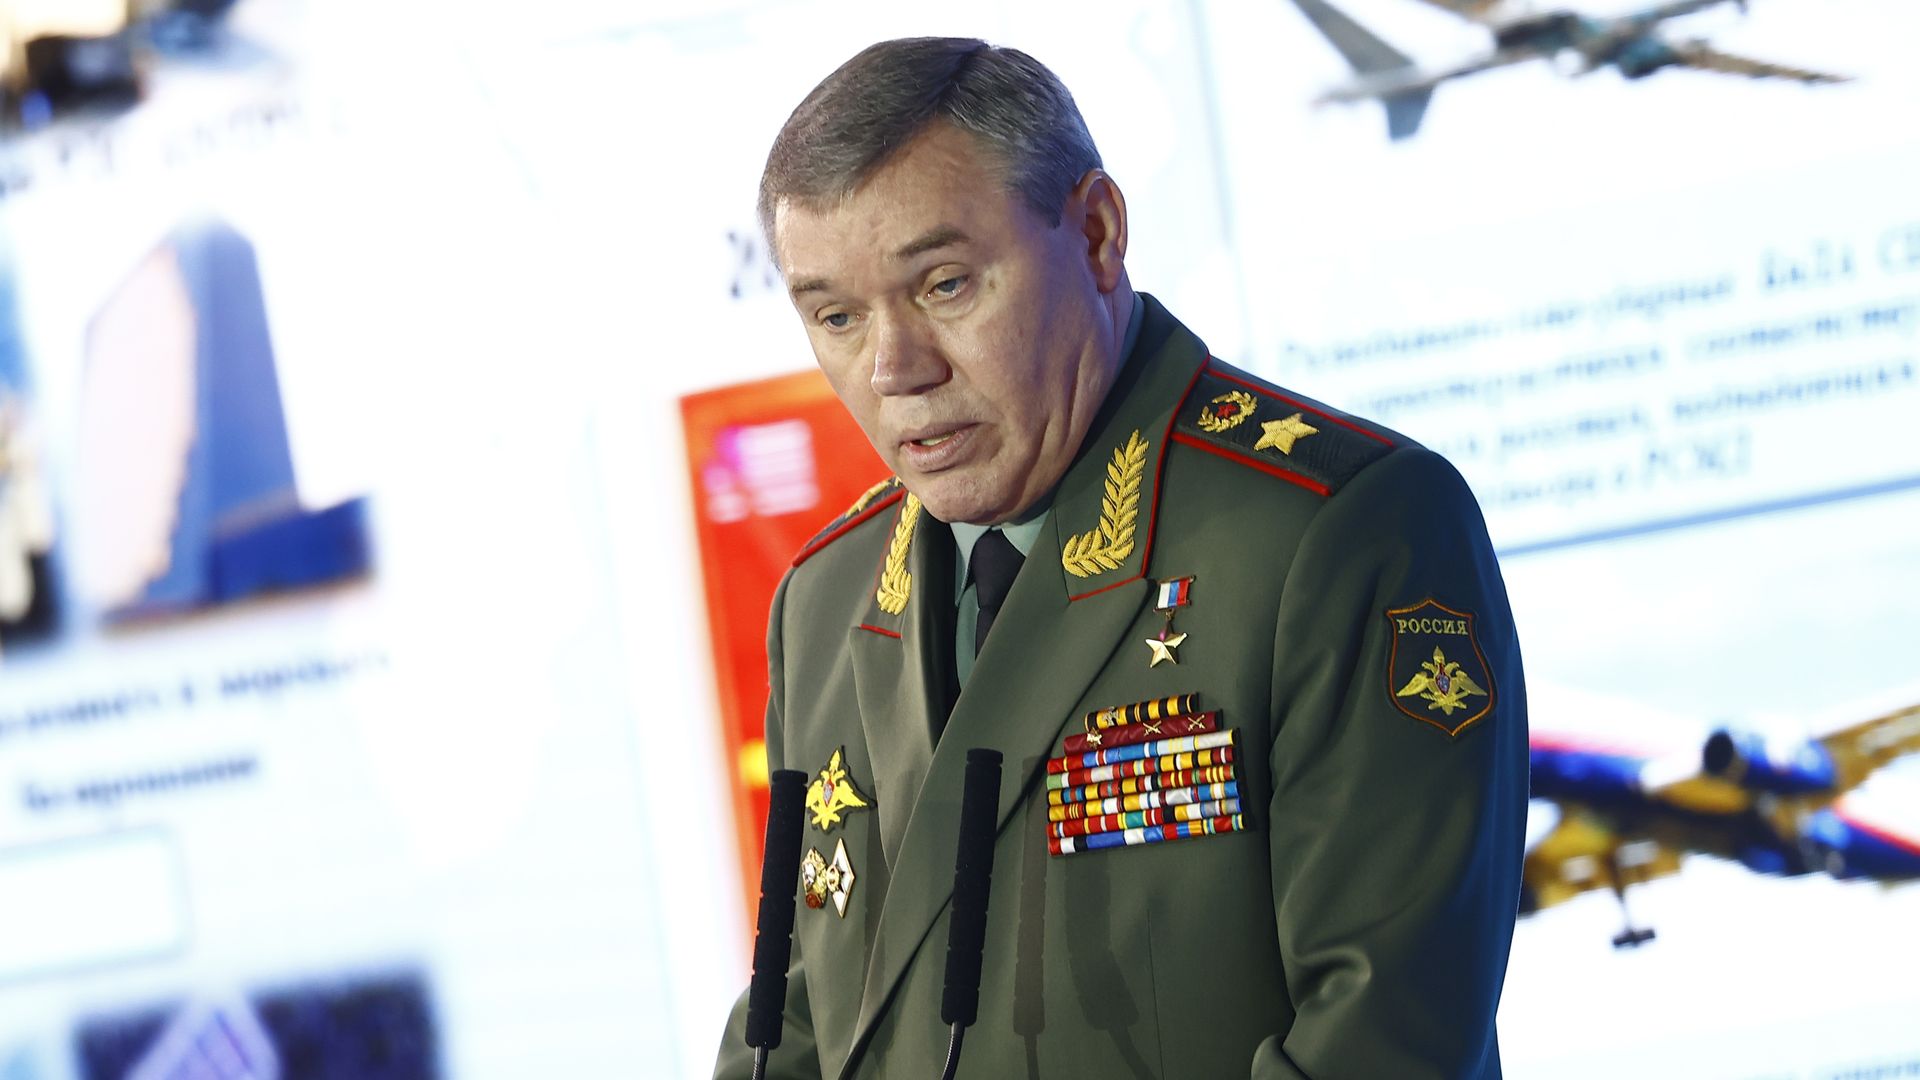 Valery Gerasimov, chief of the General Staff of the Armed Forces of Russia, in Moscow in June 2021.